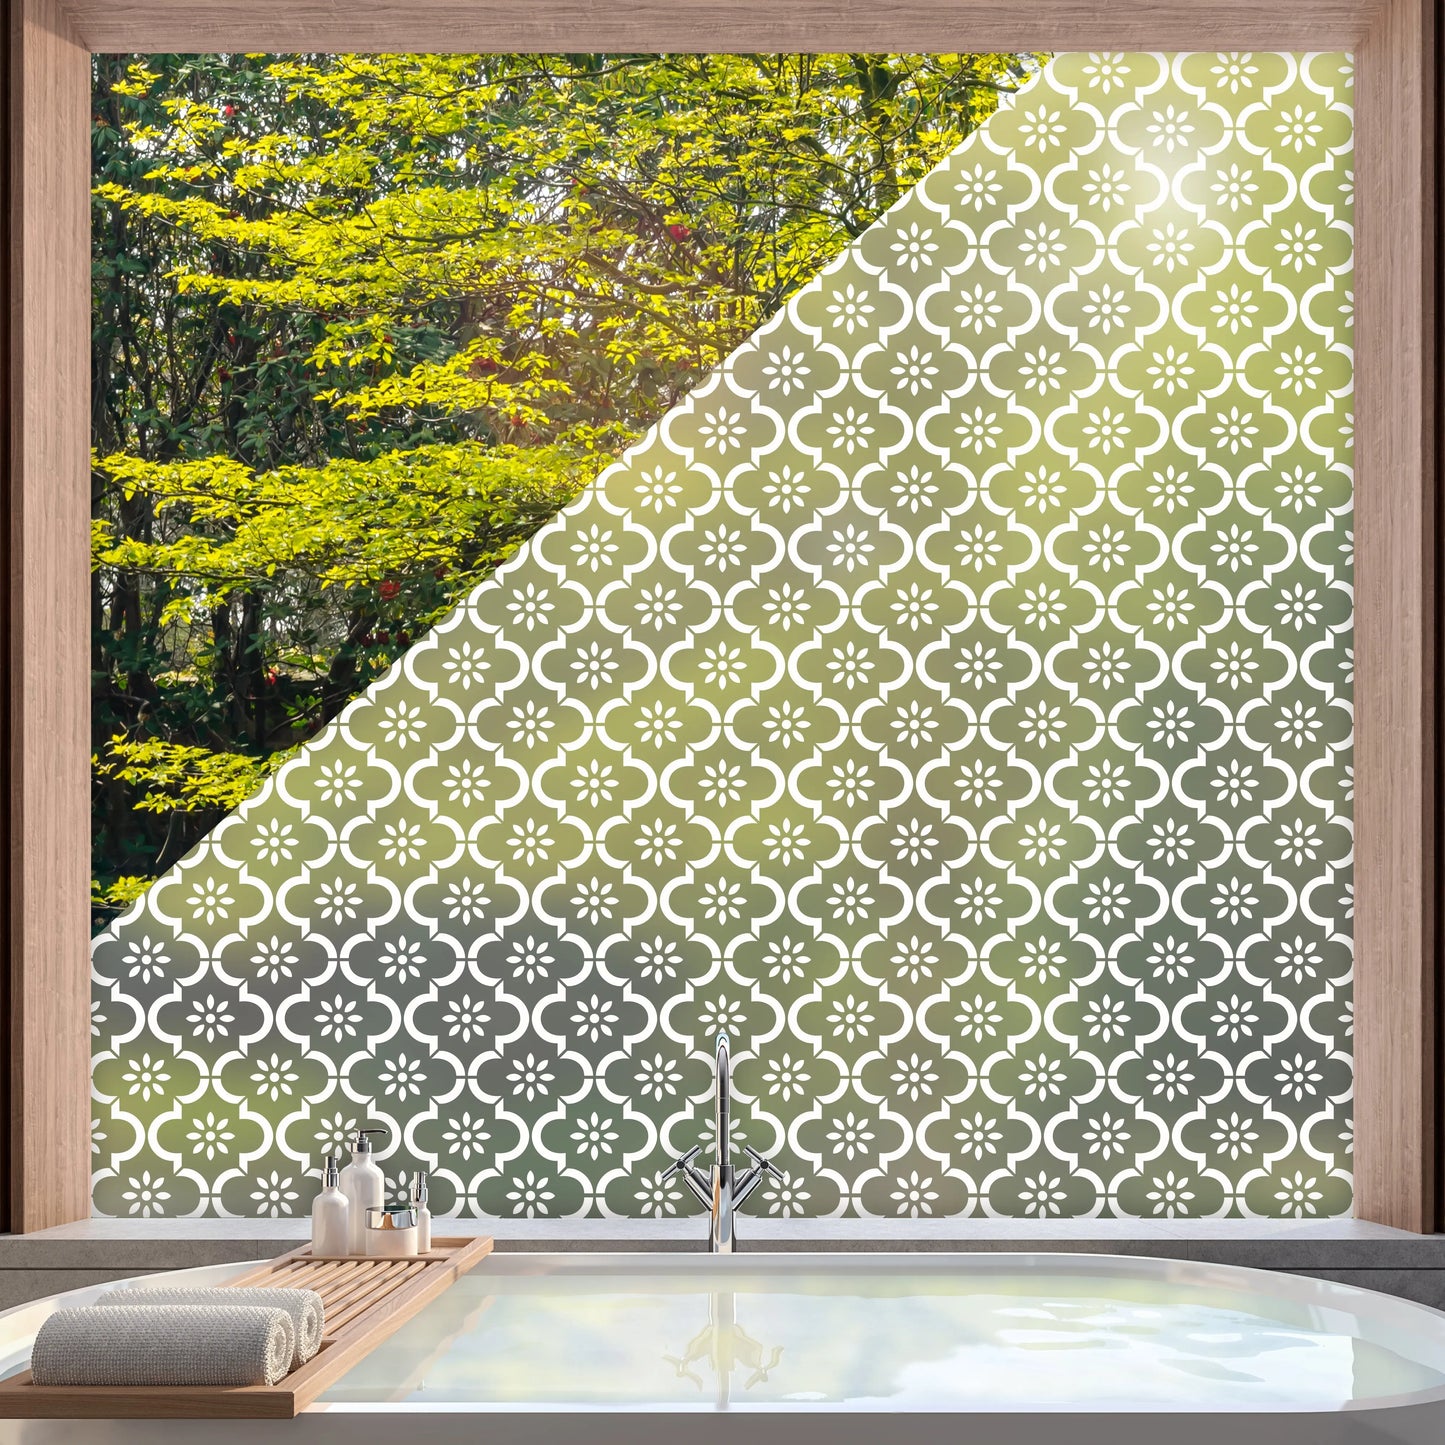 Privacy Window Jannah Frosted Window Privacy Panel Dizzy Duck Designs